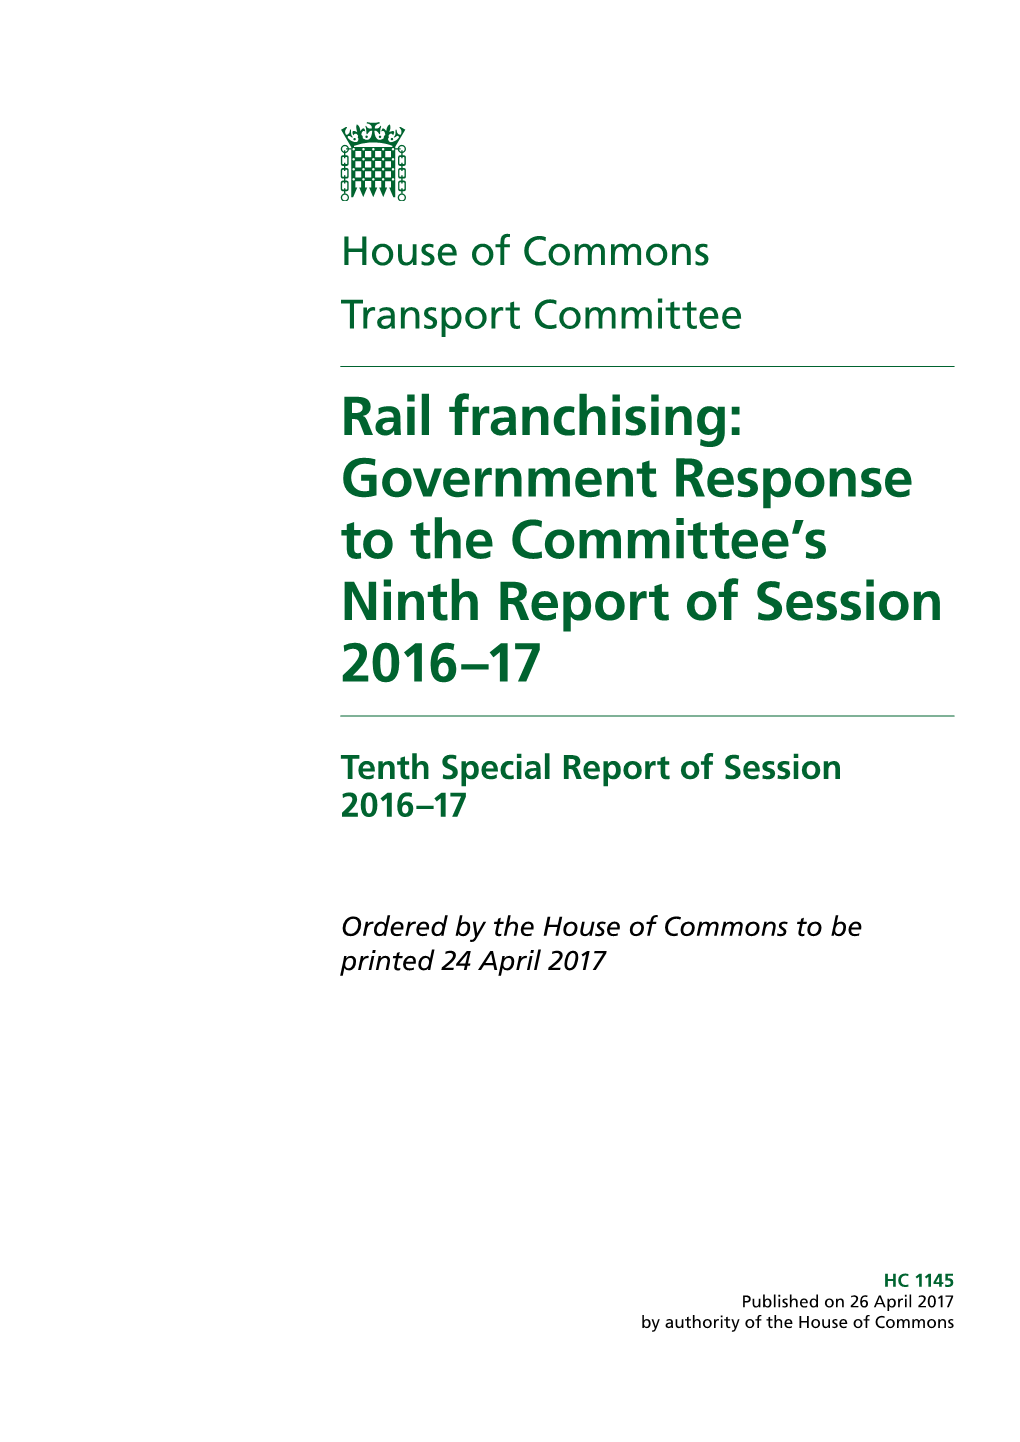 Rail Franchising: Government Response to the Committee's